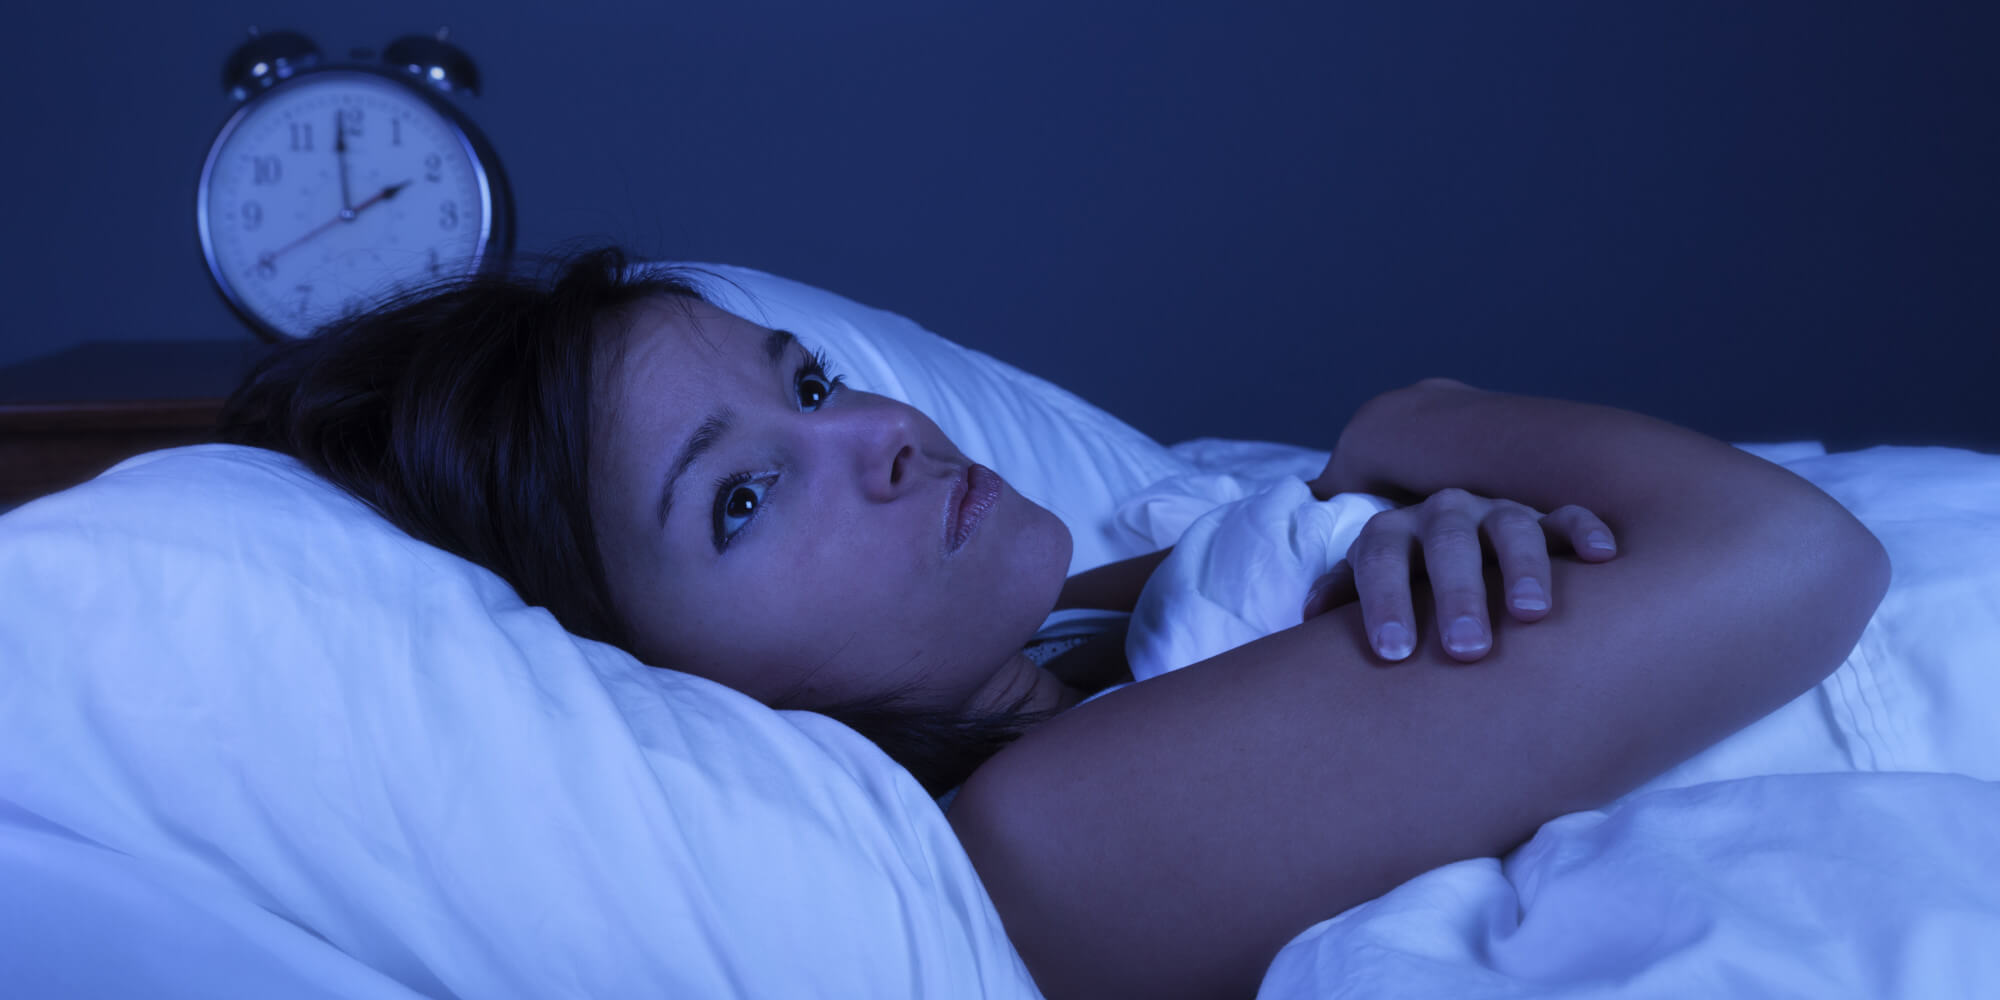 How Does Sleep Deprivation Can Affect Your Mental Health